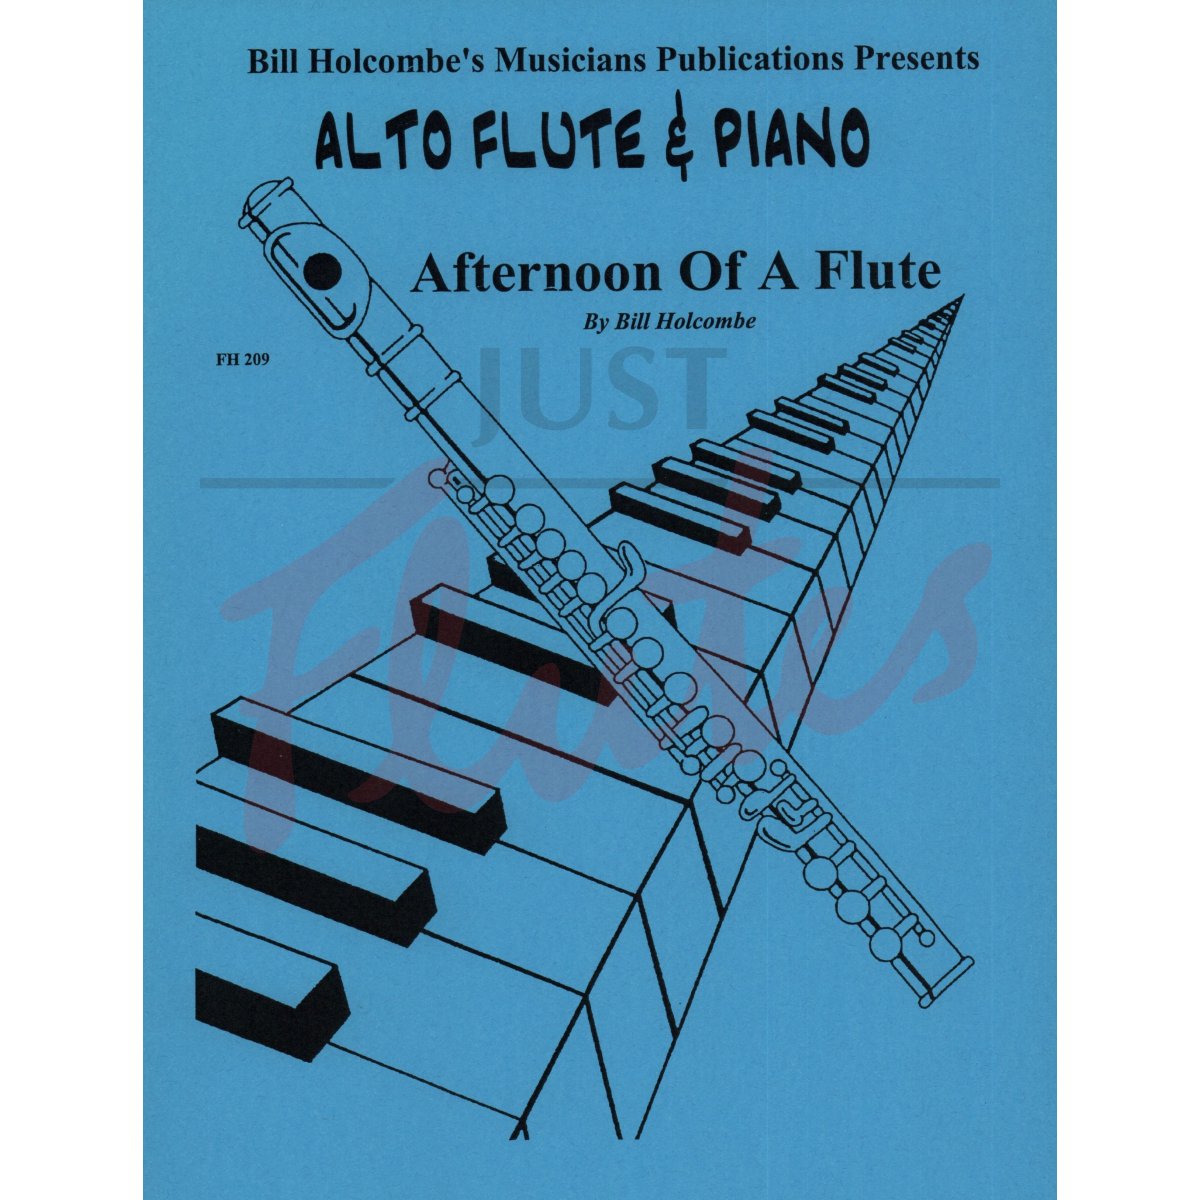 Afternoon of a Flute for Alto Flute and Piano